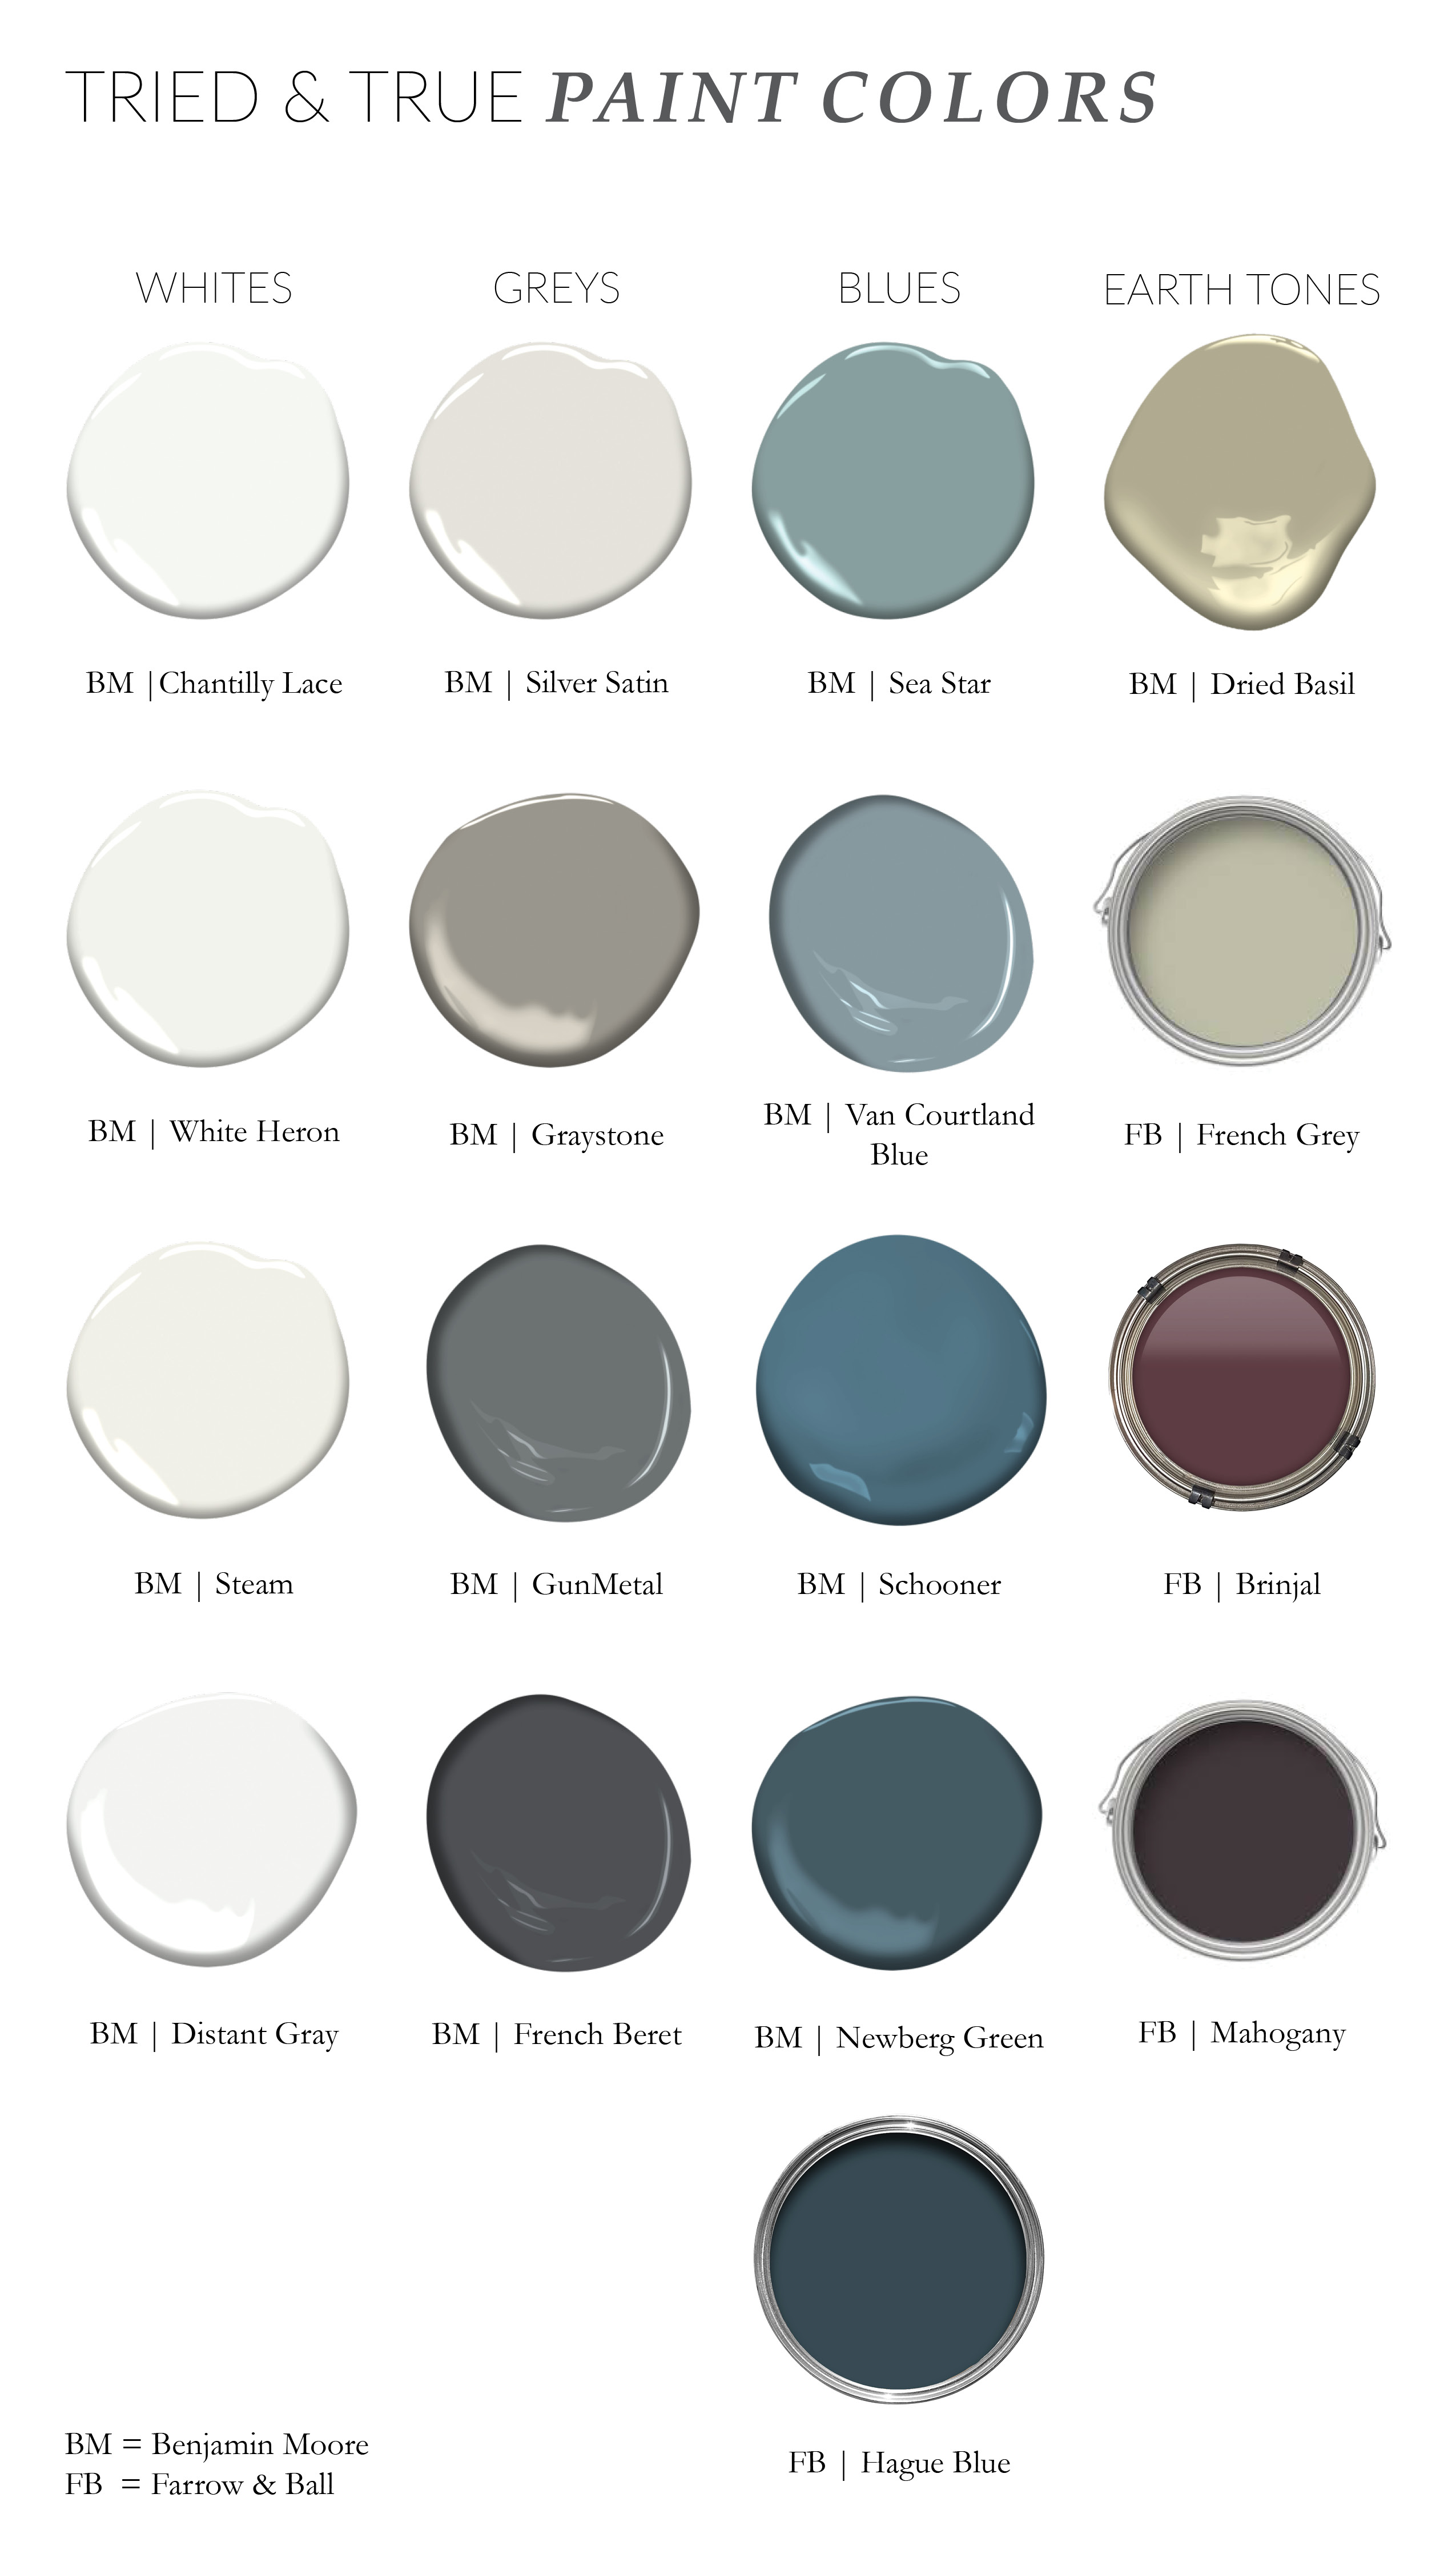 Tried & True Paint Colors  LDa Architecture and Interiors